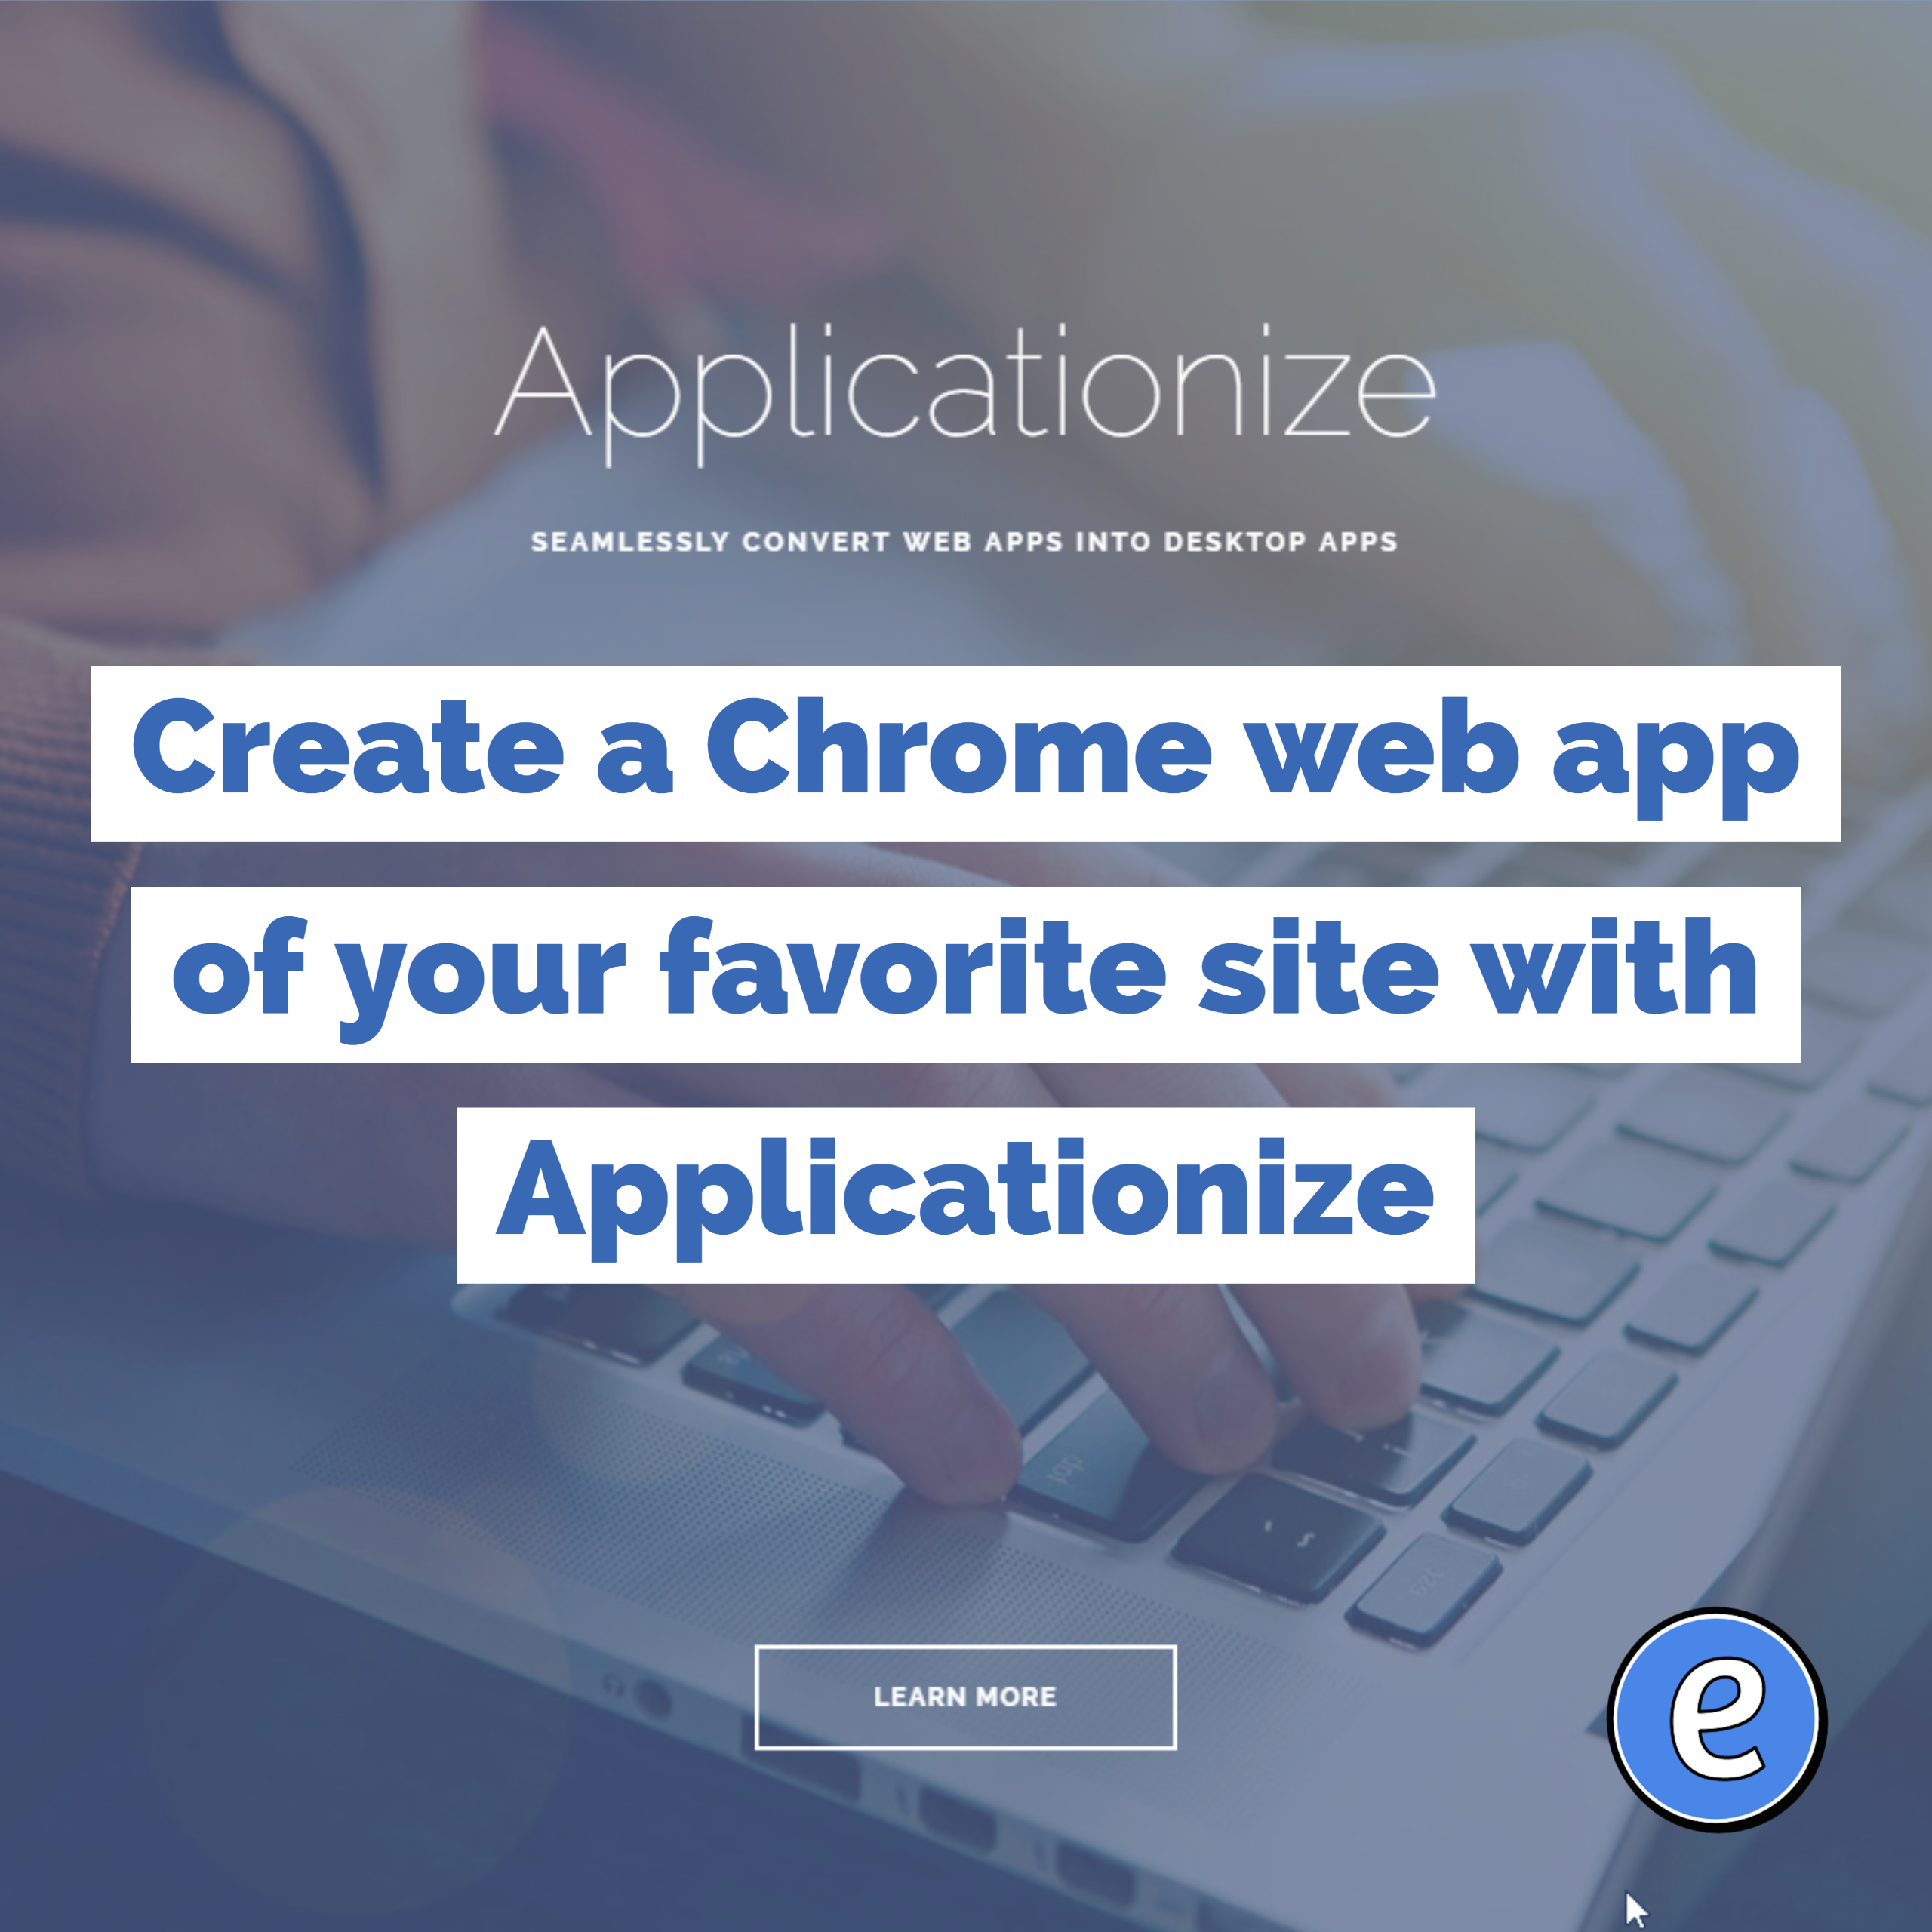 Create a Chrome web app of your favorite site with Applicationize